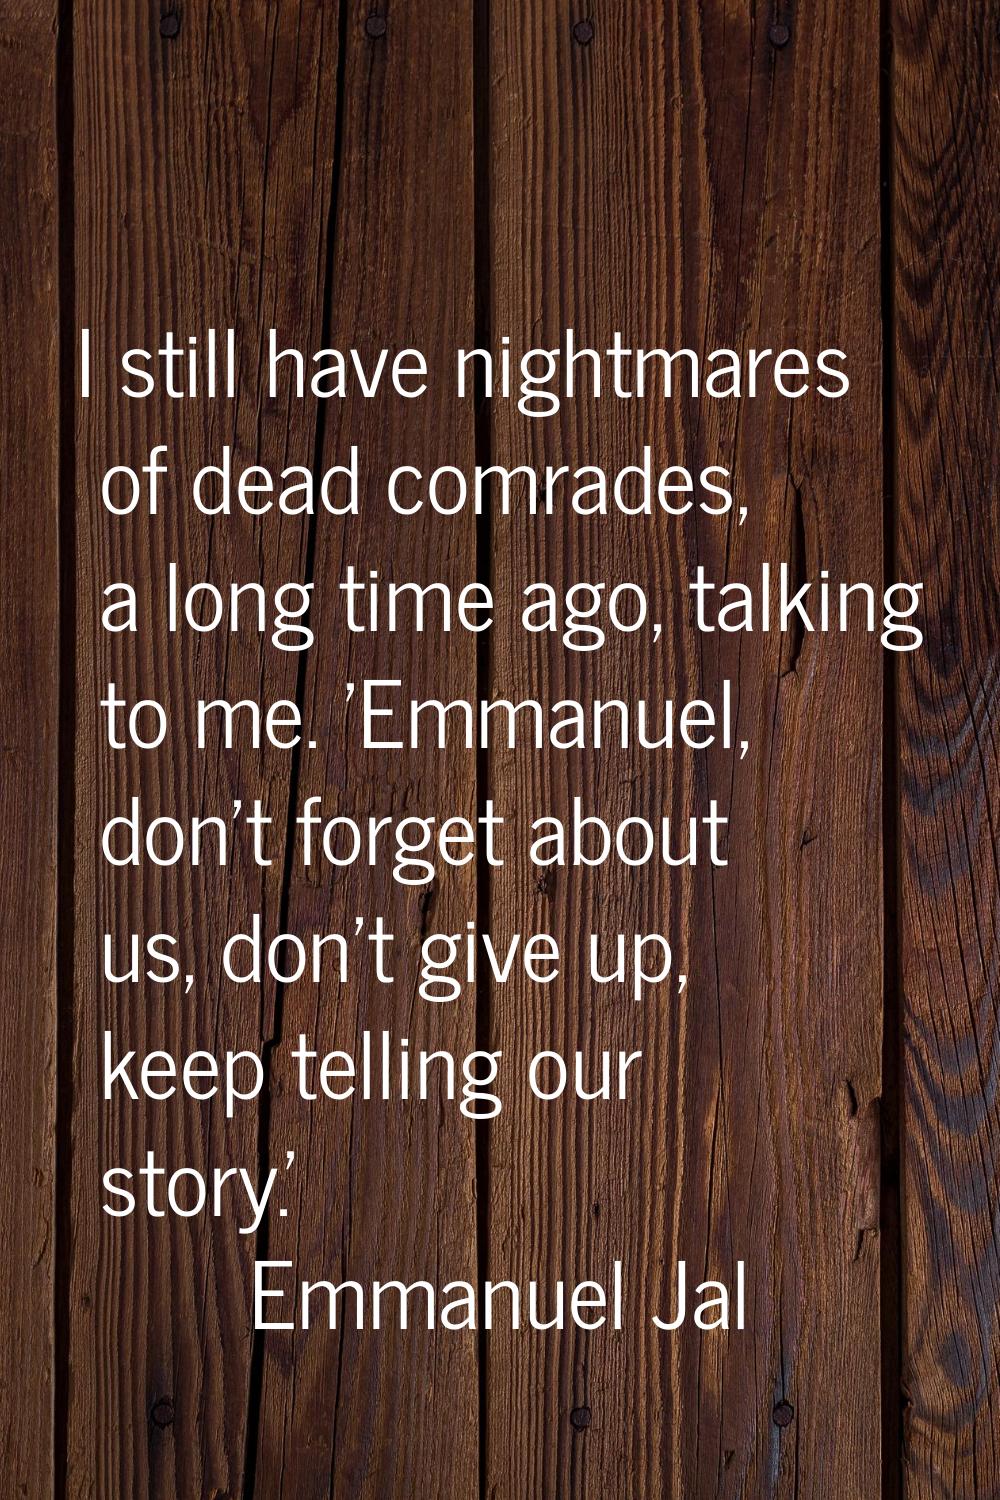 I still have nightmares of dead comrades, a long time ago, talking to me. 'Emmanuel, don't forget a